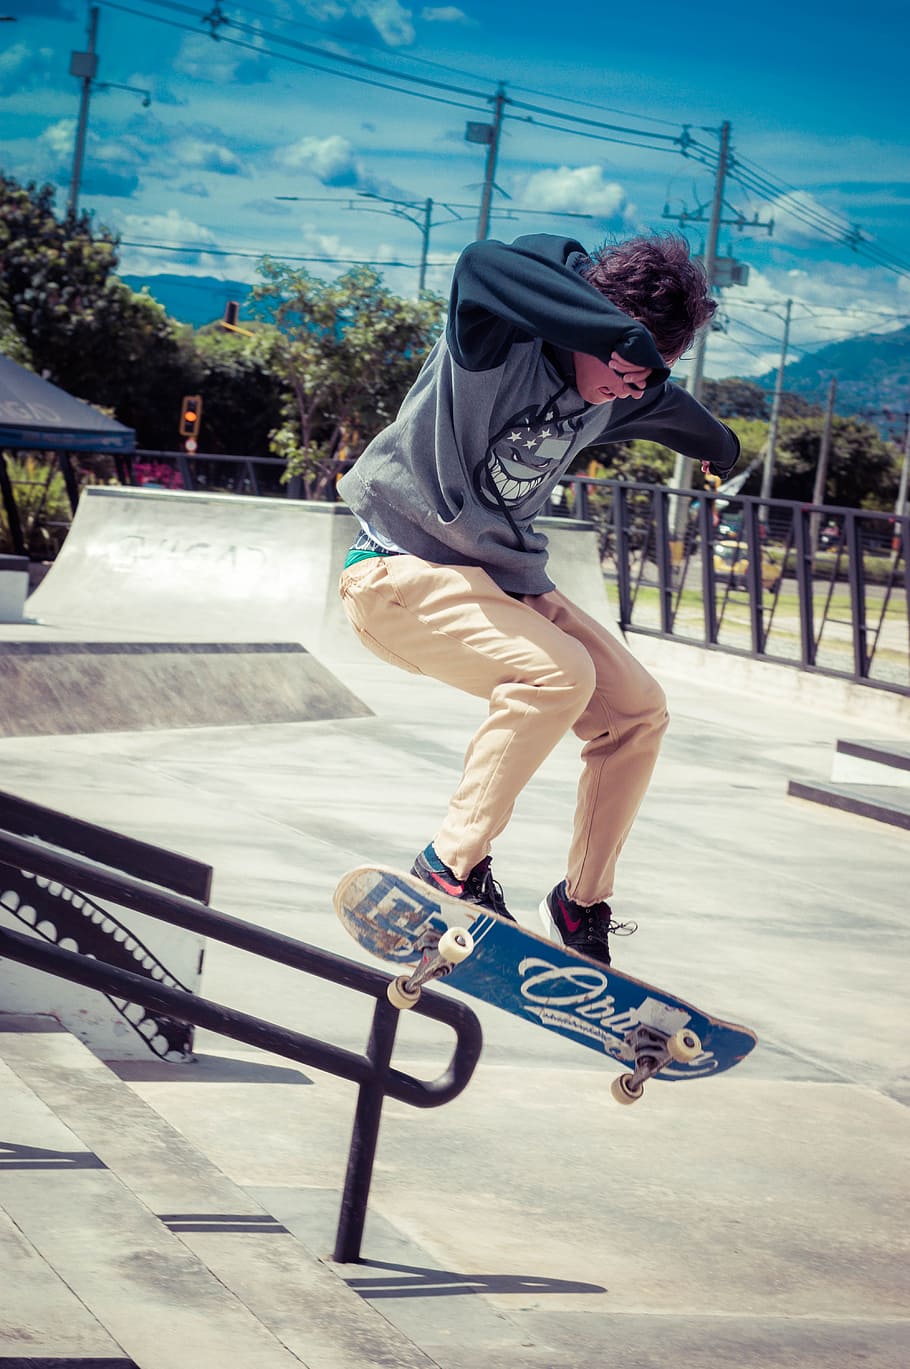 skate, medellin, beam, full length, one person, real people, leisure activity, lifestyles, skateboard, balance